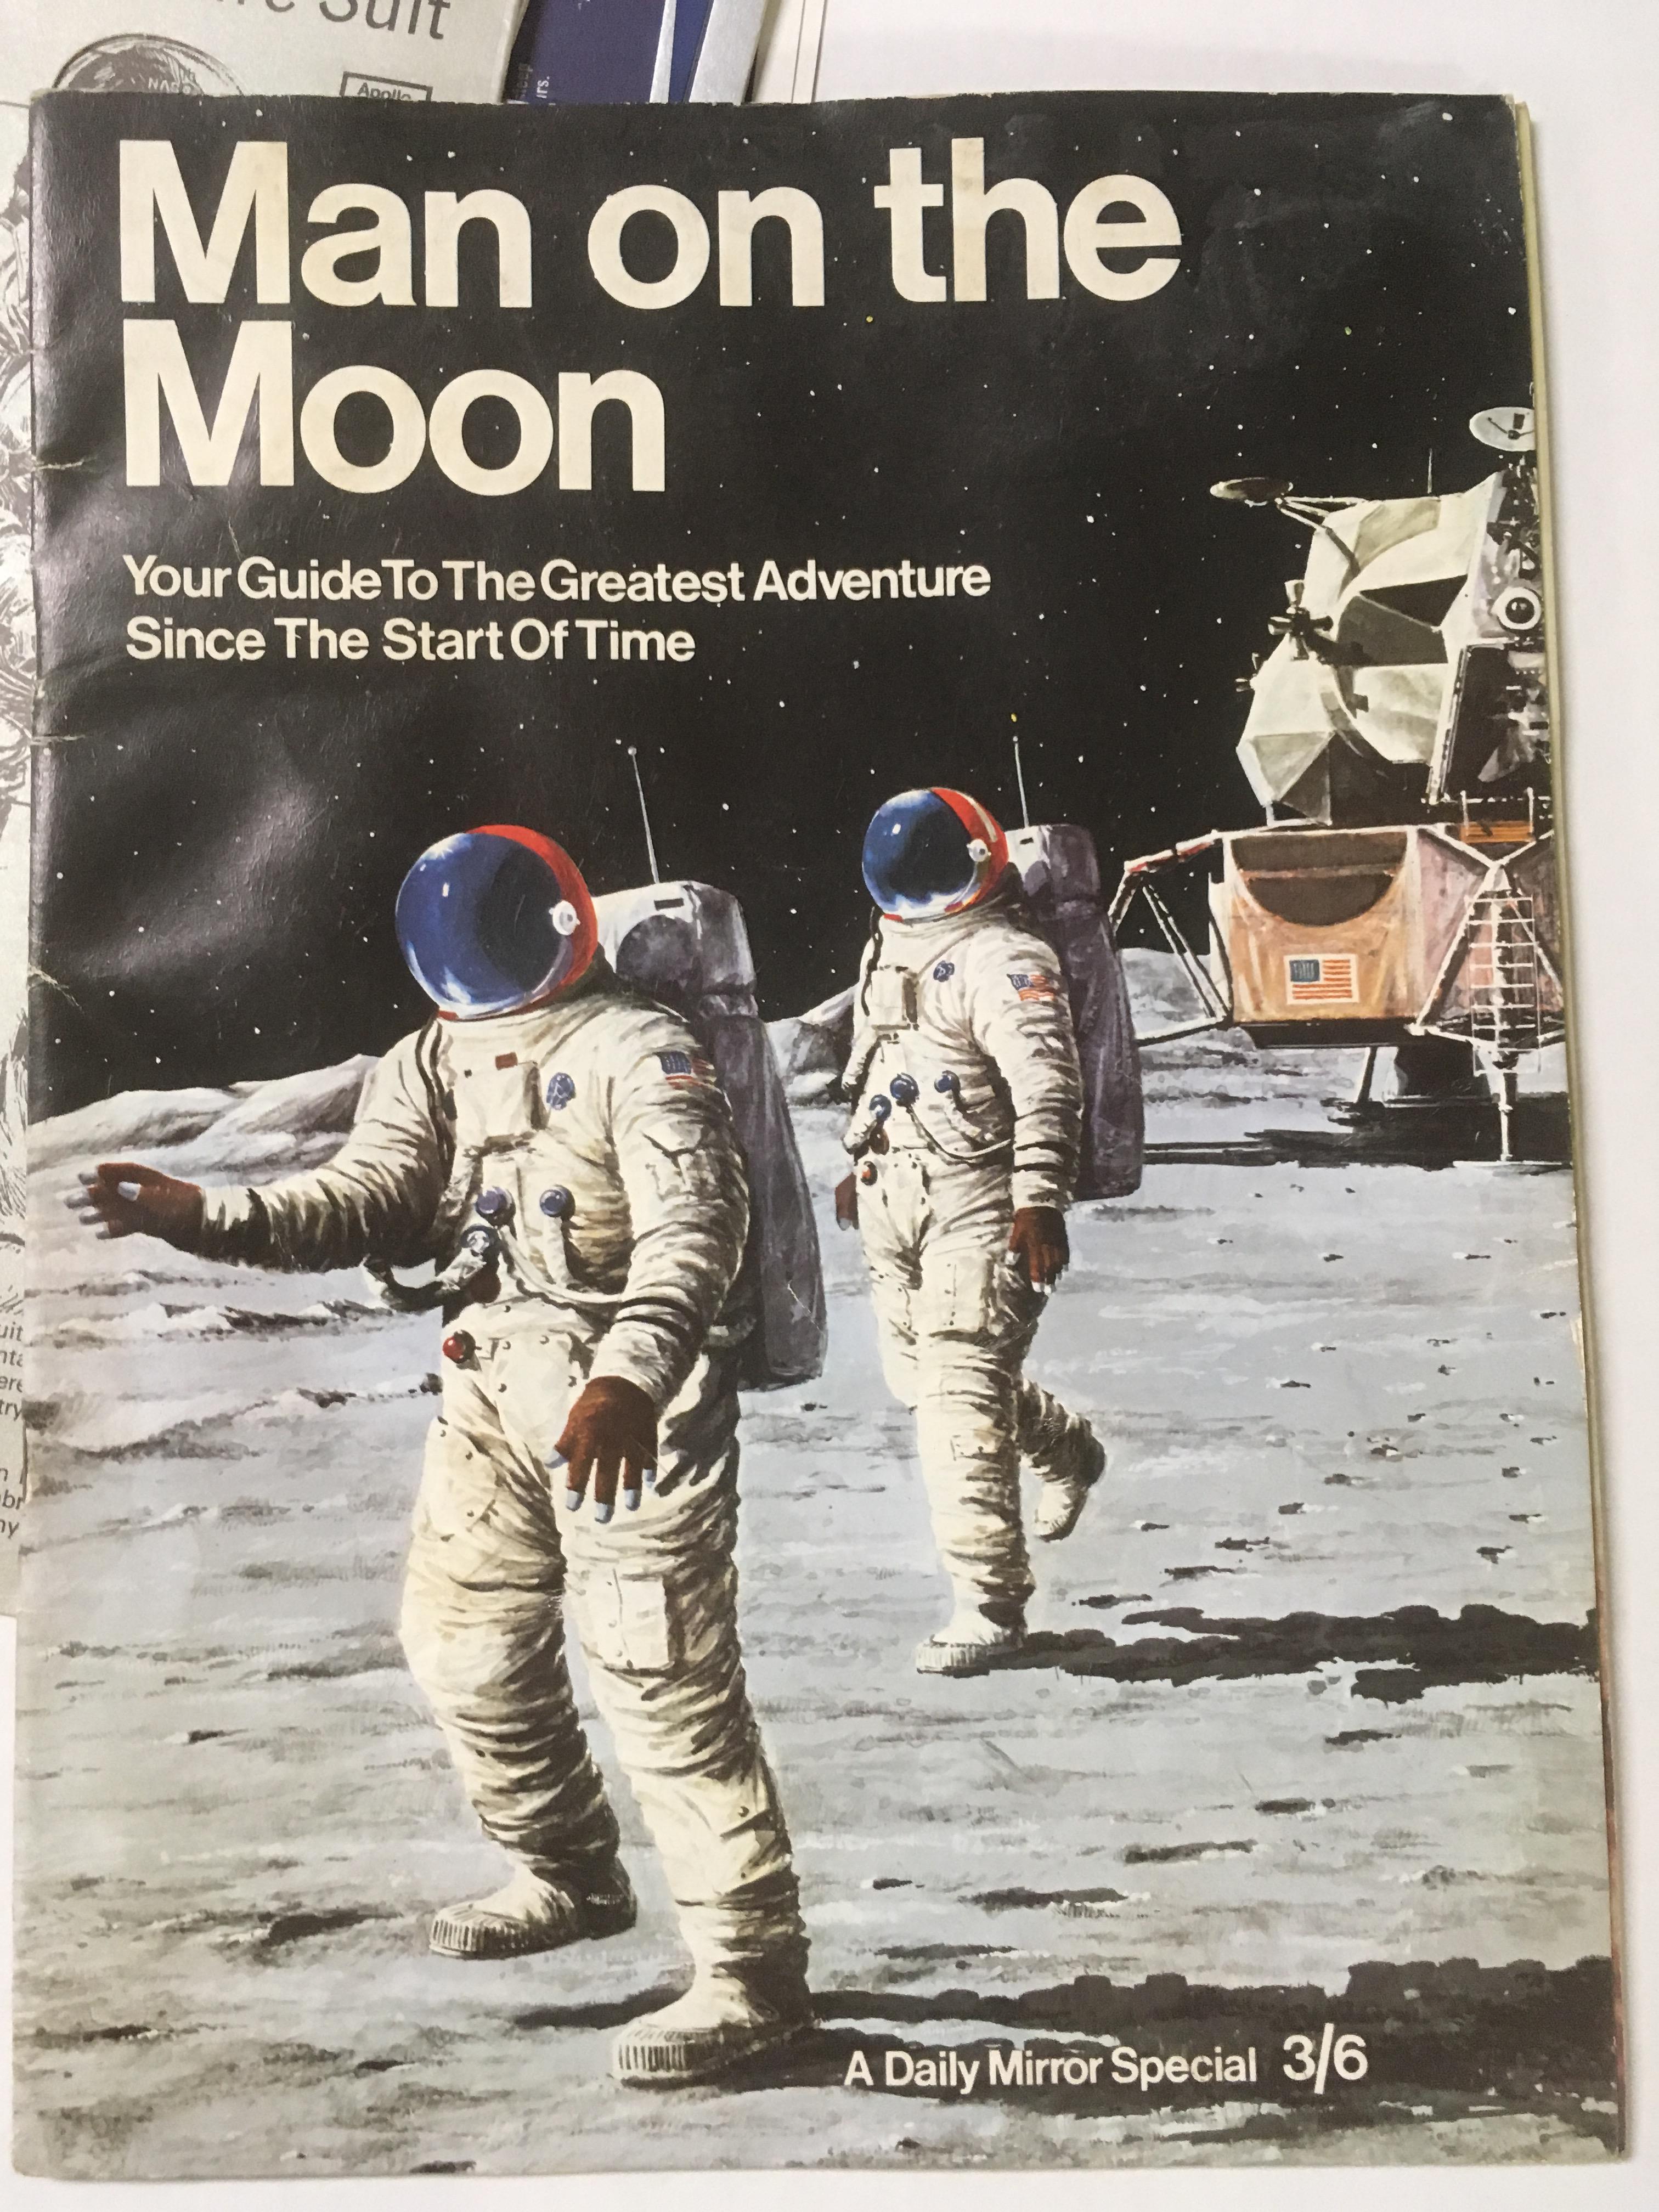 GEMINI SCAN c1969 TOUCHDOWN ON THE MOON PACK, APPEARS COMPLETE, ALSO AILY MIRROR SPECIAL SUPPLEMENT. - Image 2 of 2